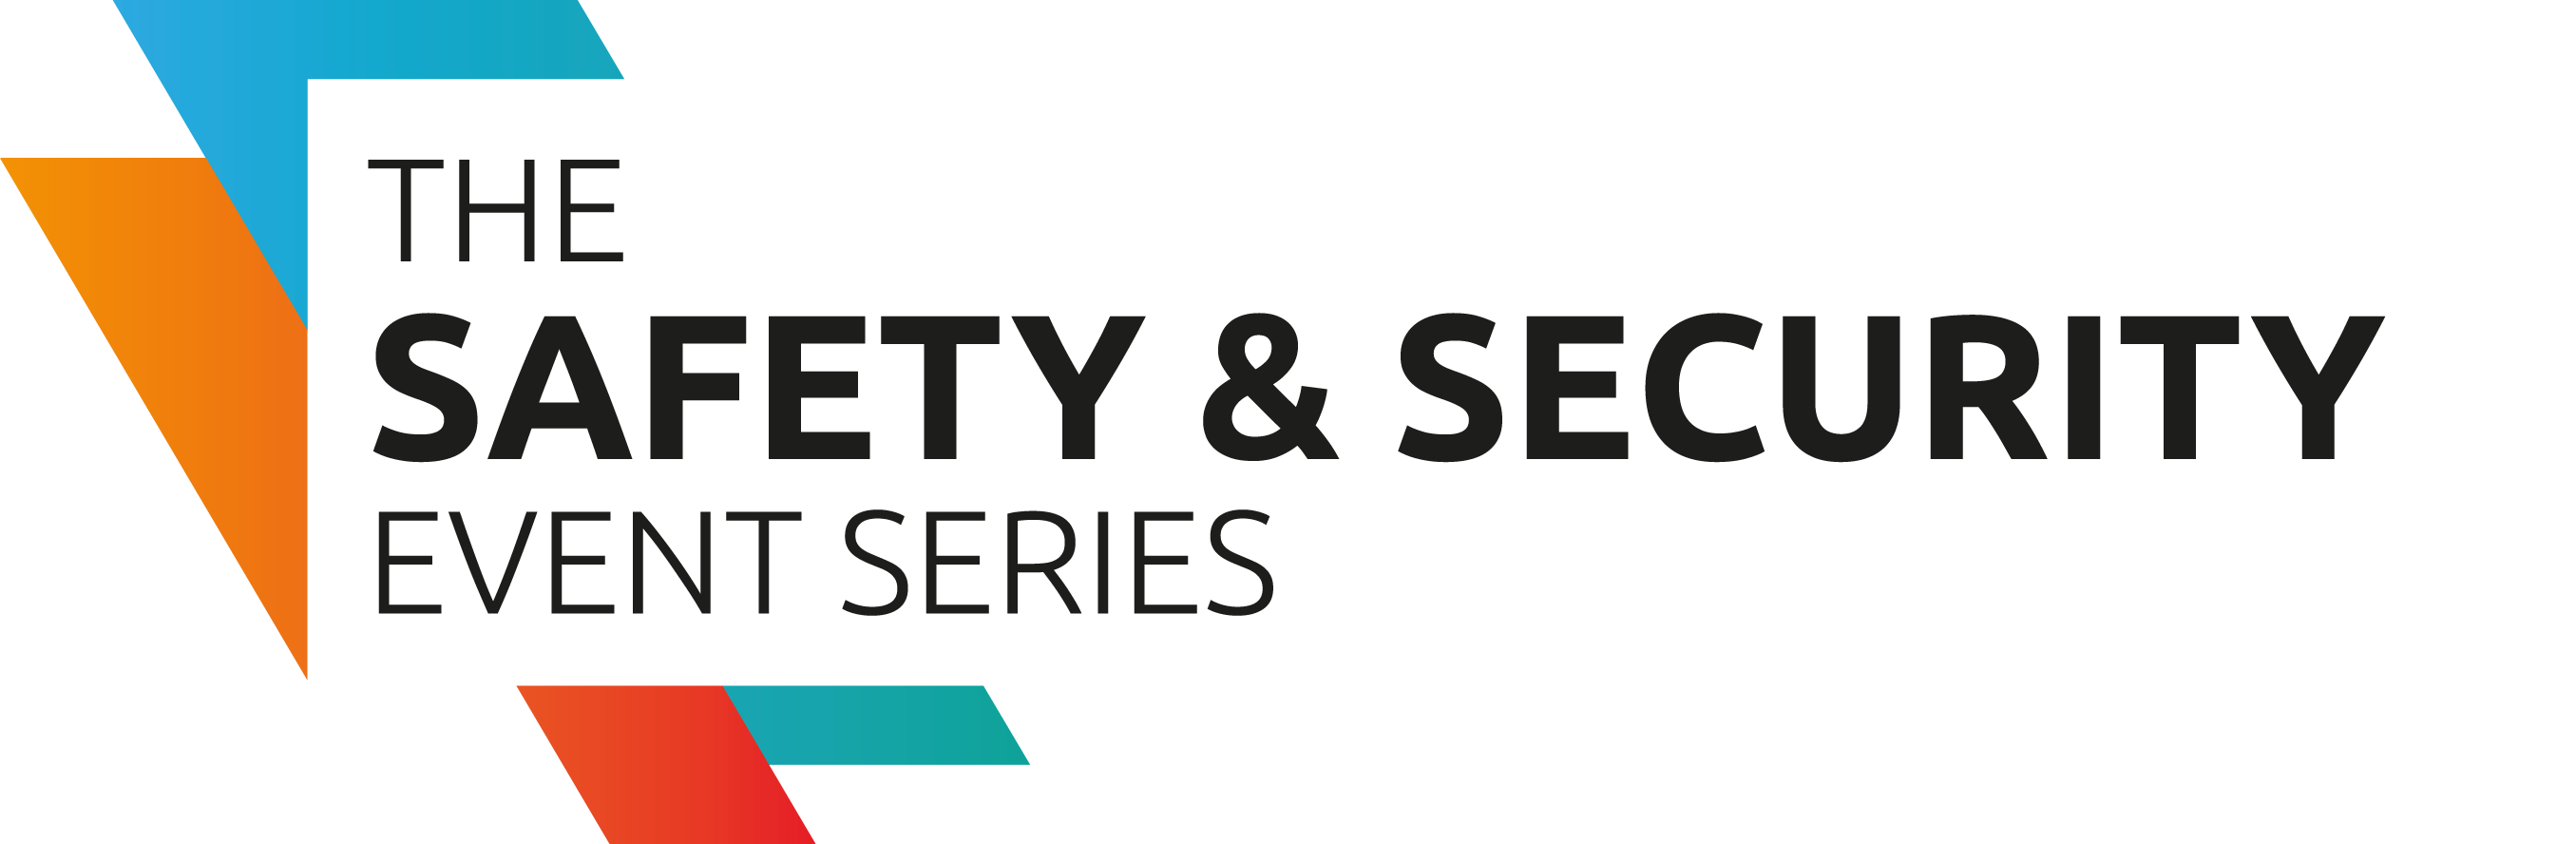 safety and security series logo